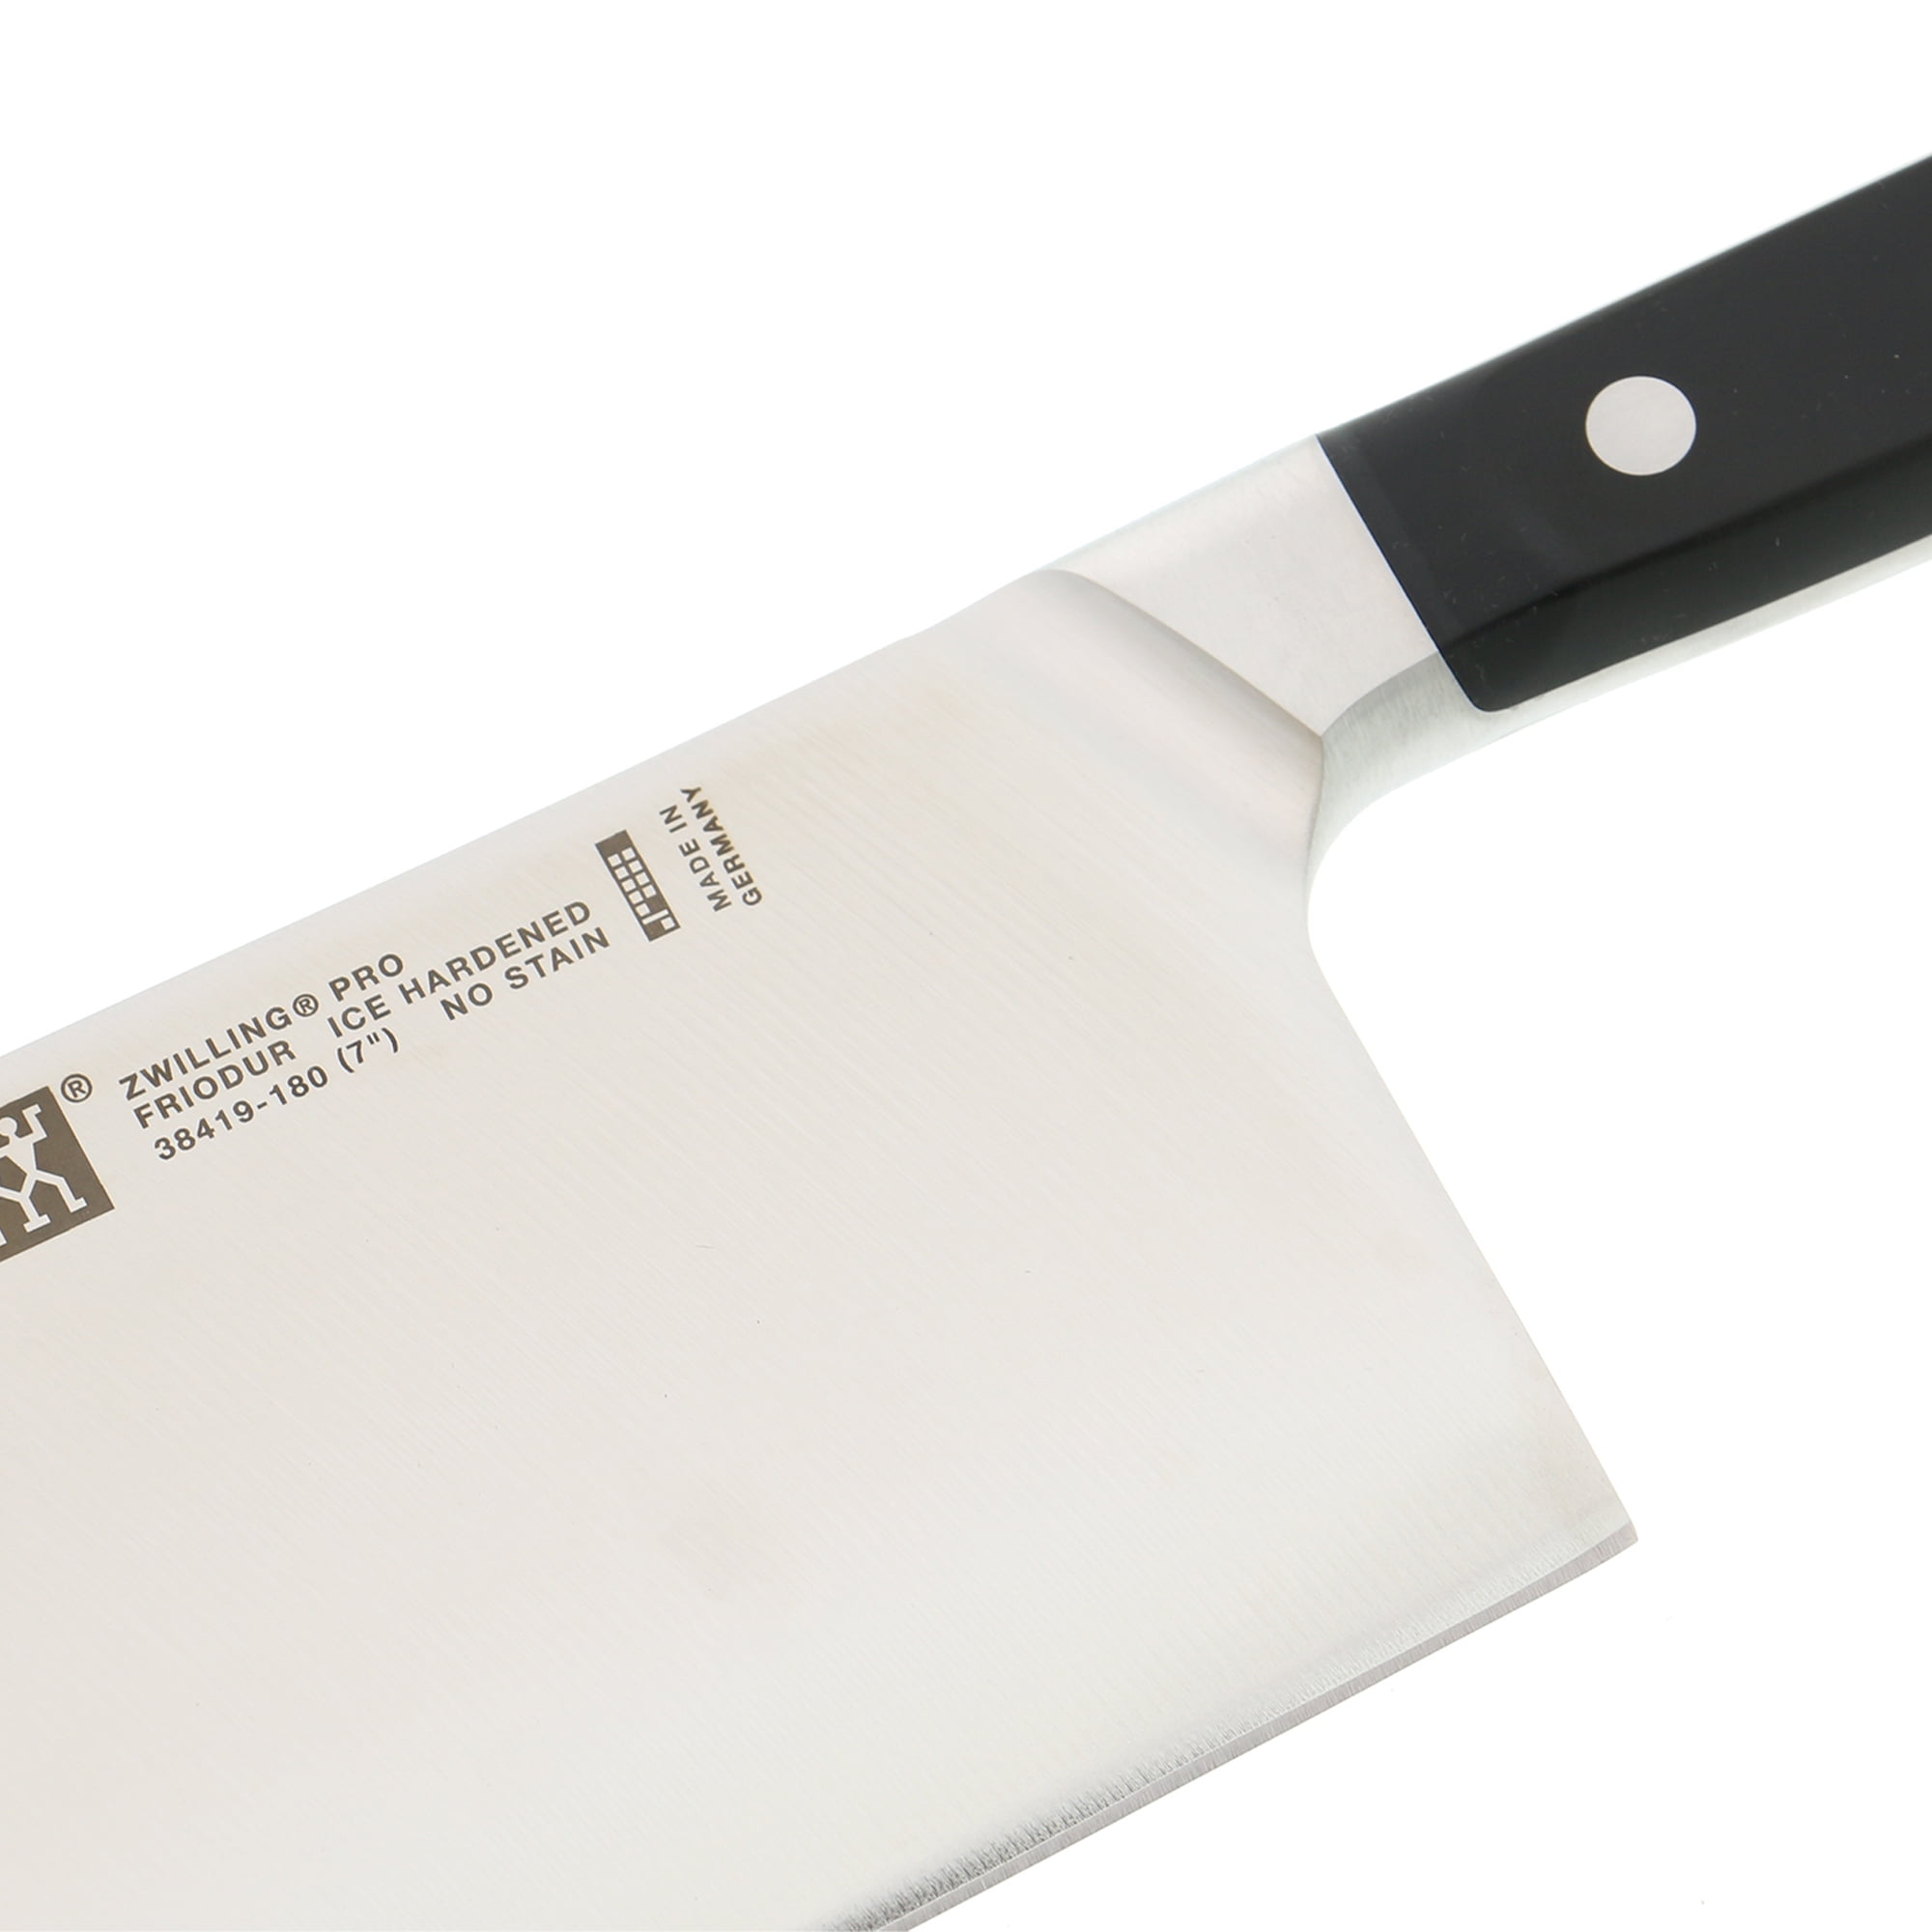 Gunter Wilhelm 7 inch Knife Executive Chef Series Asian/Vegetable Cleaver